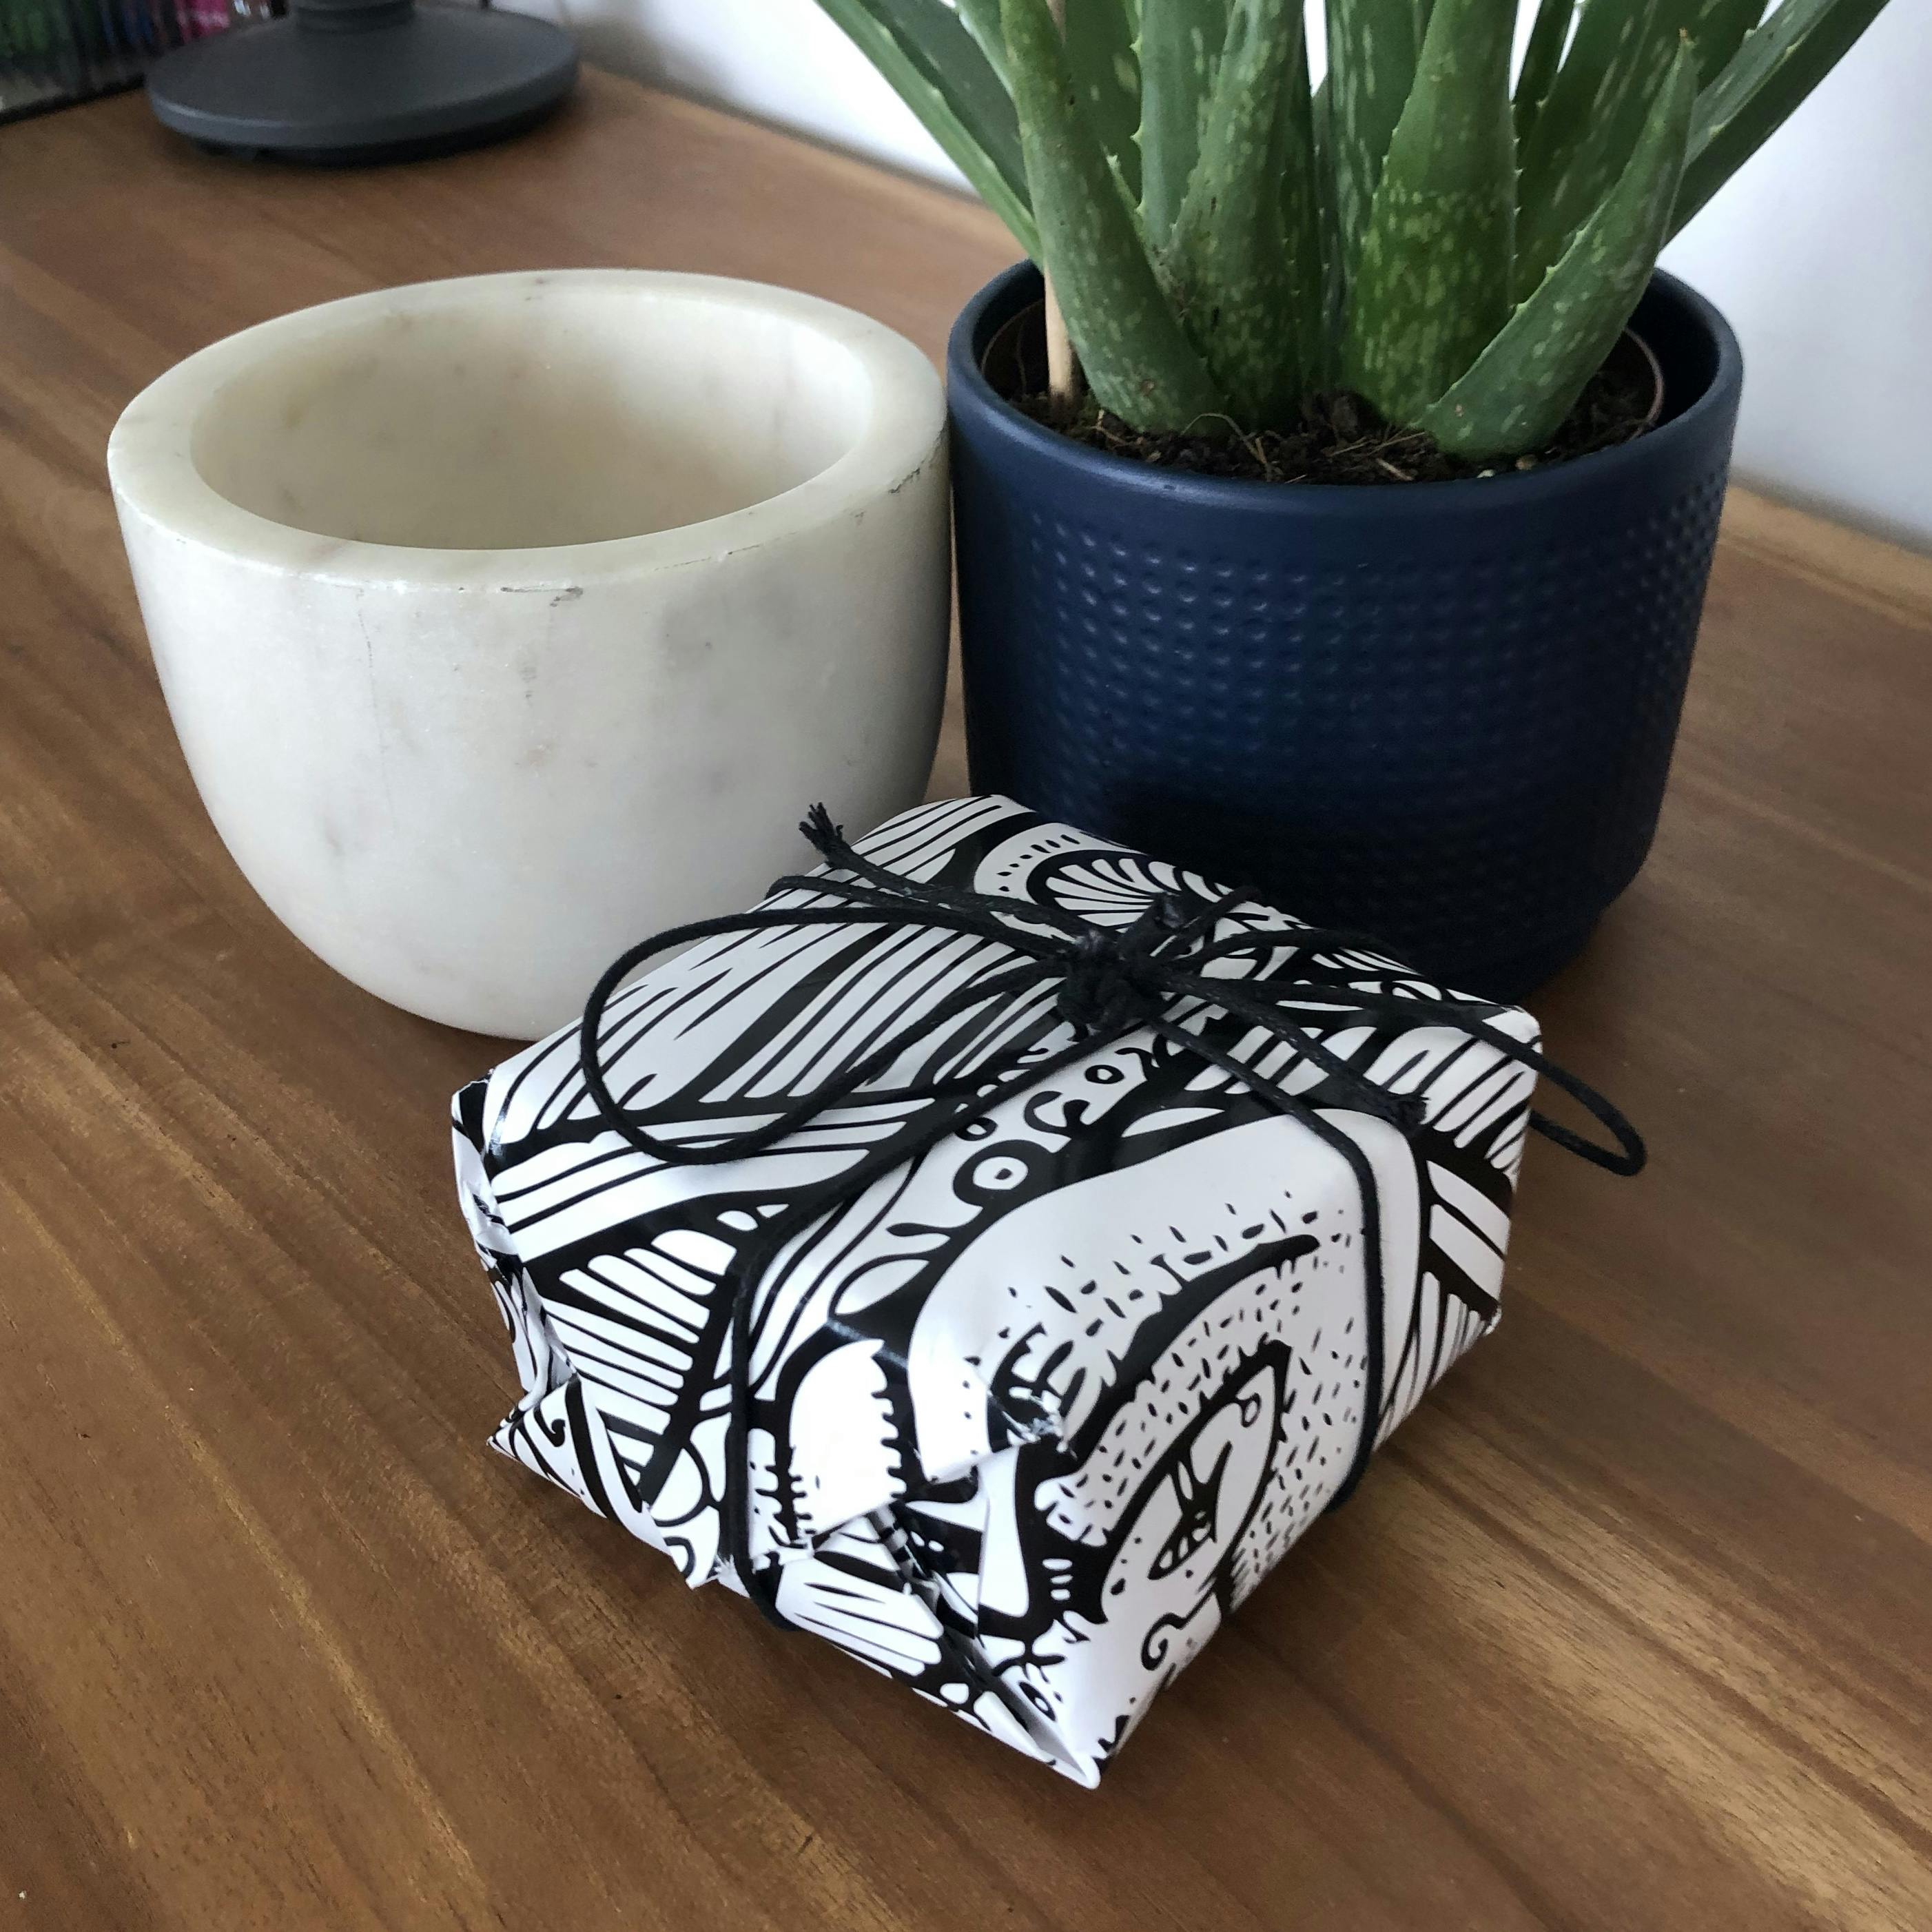 Photograph of a little box nicely wrapped up in glossy, black and white paper. There's a plant and a heavy kitchen mortar in the composition too, all on top of a wooden desk